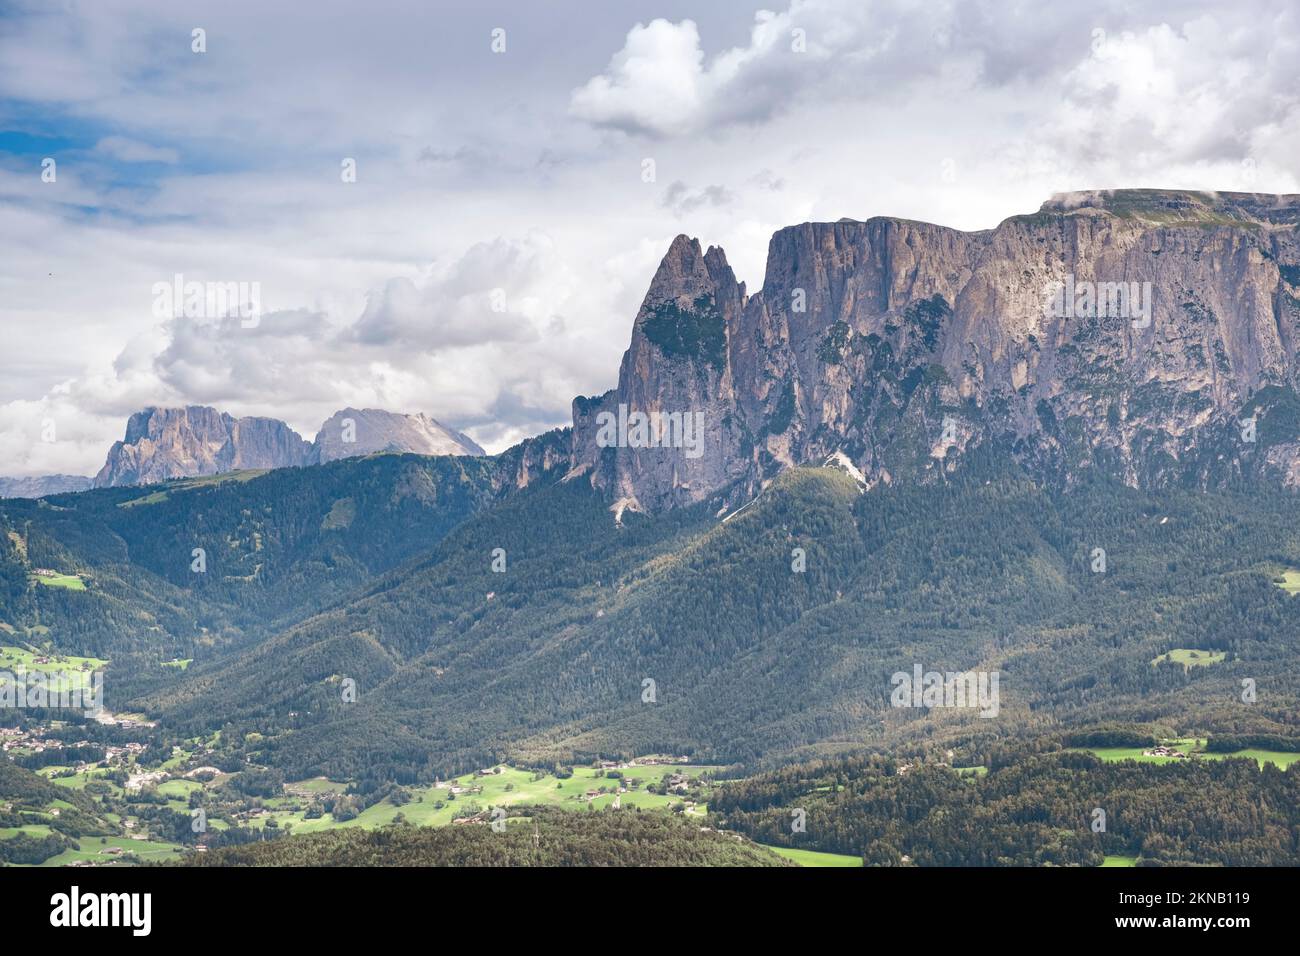 Low Angle View Of Mountain Against Cloudy Sky. Bozen, Italy Stock Photo